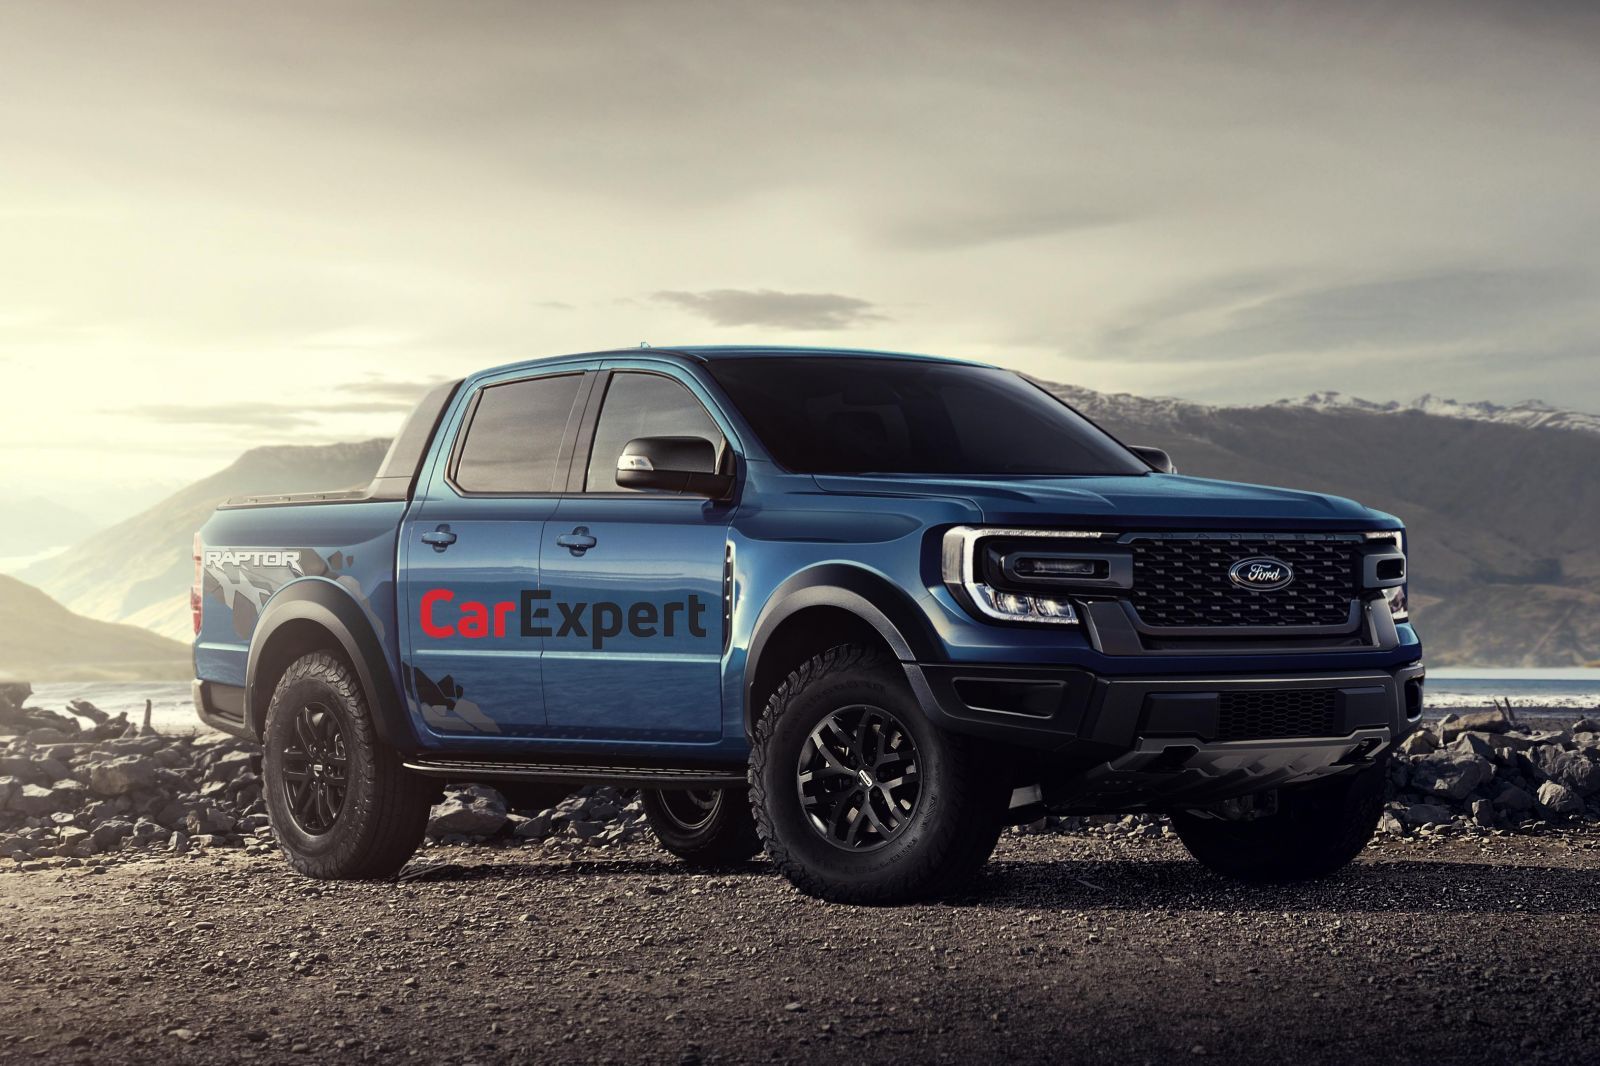 Report: Ford Ranger Raptor Gets a 325-HP V6, Fox Shocks; May Be US